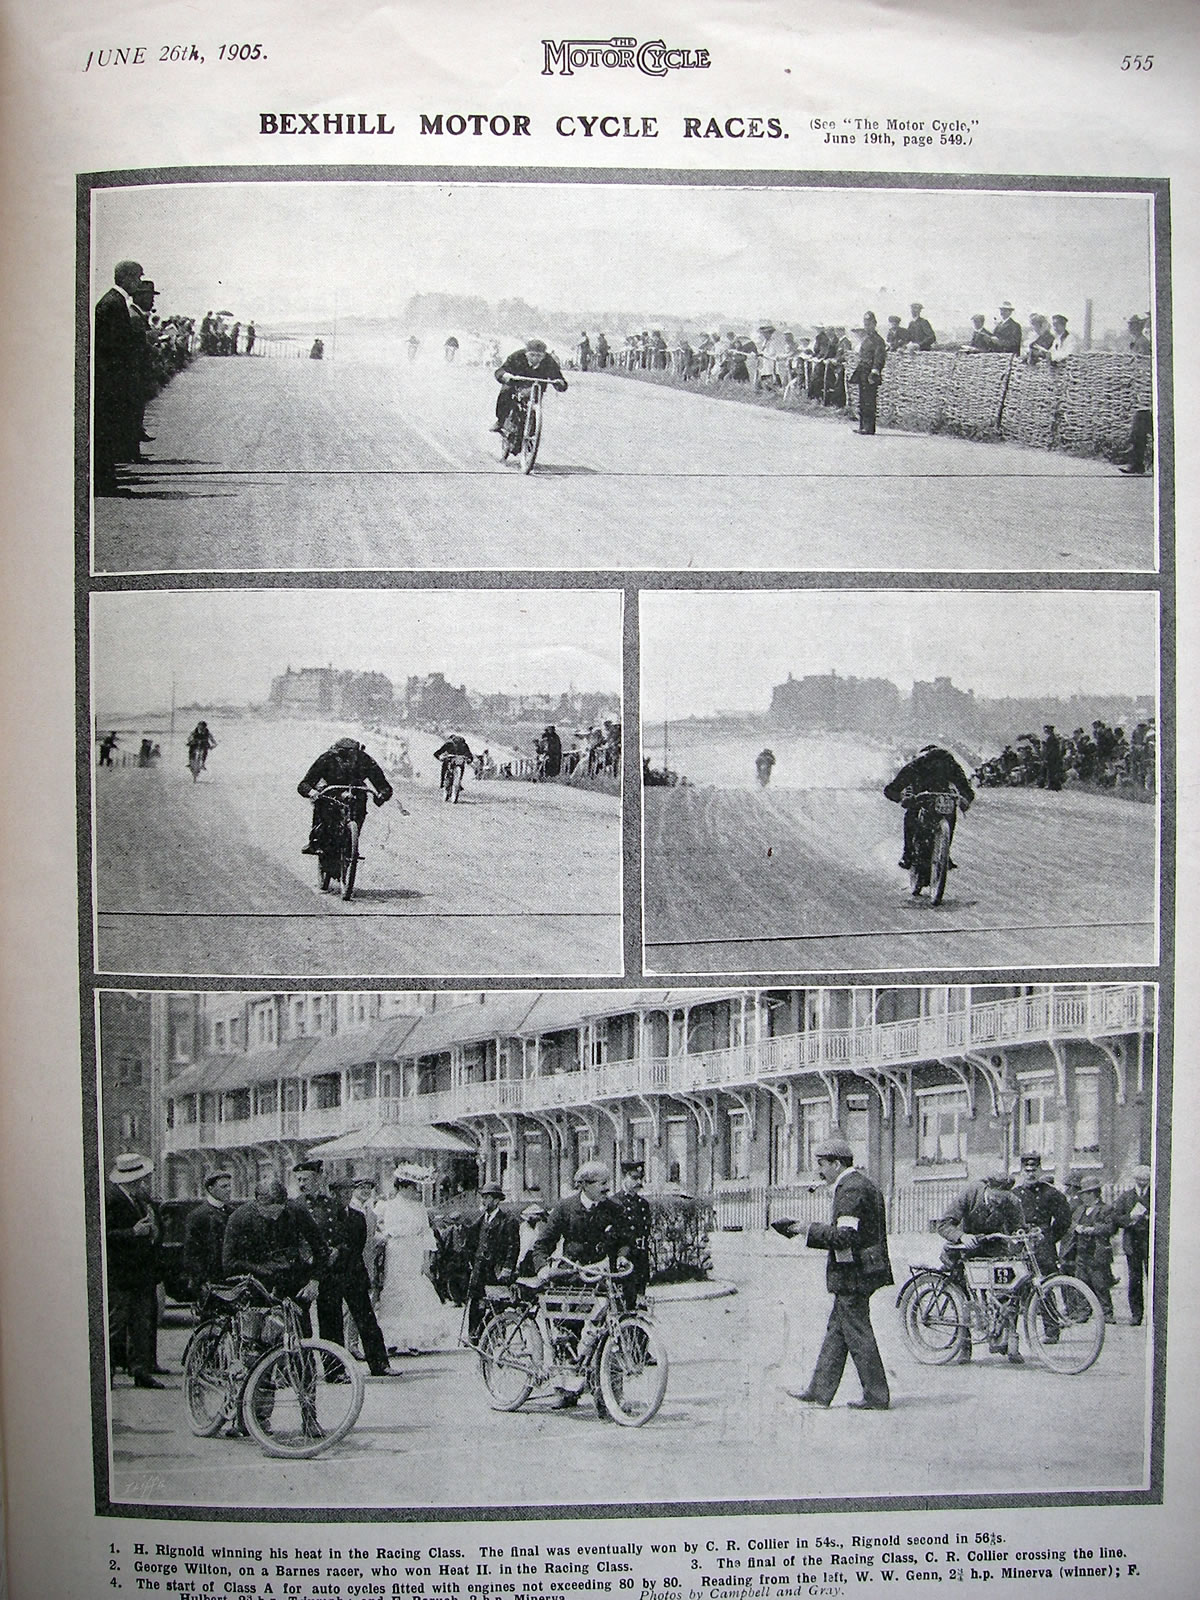 Bexhill motorcycle races 1905